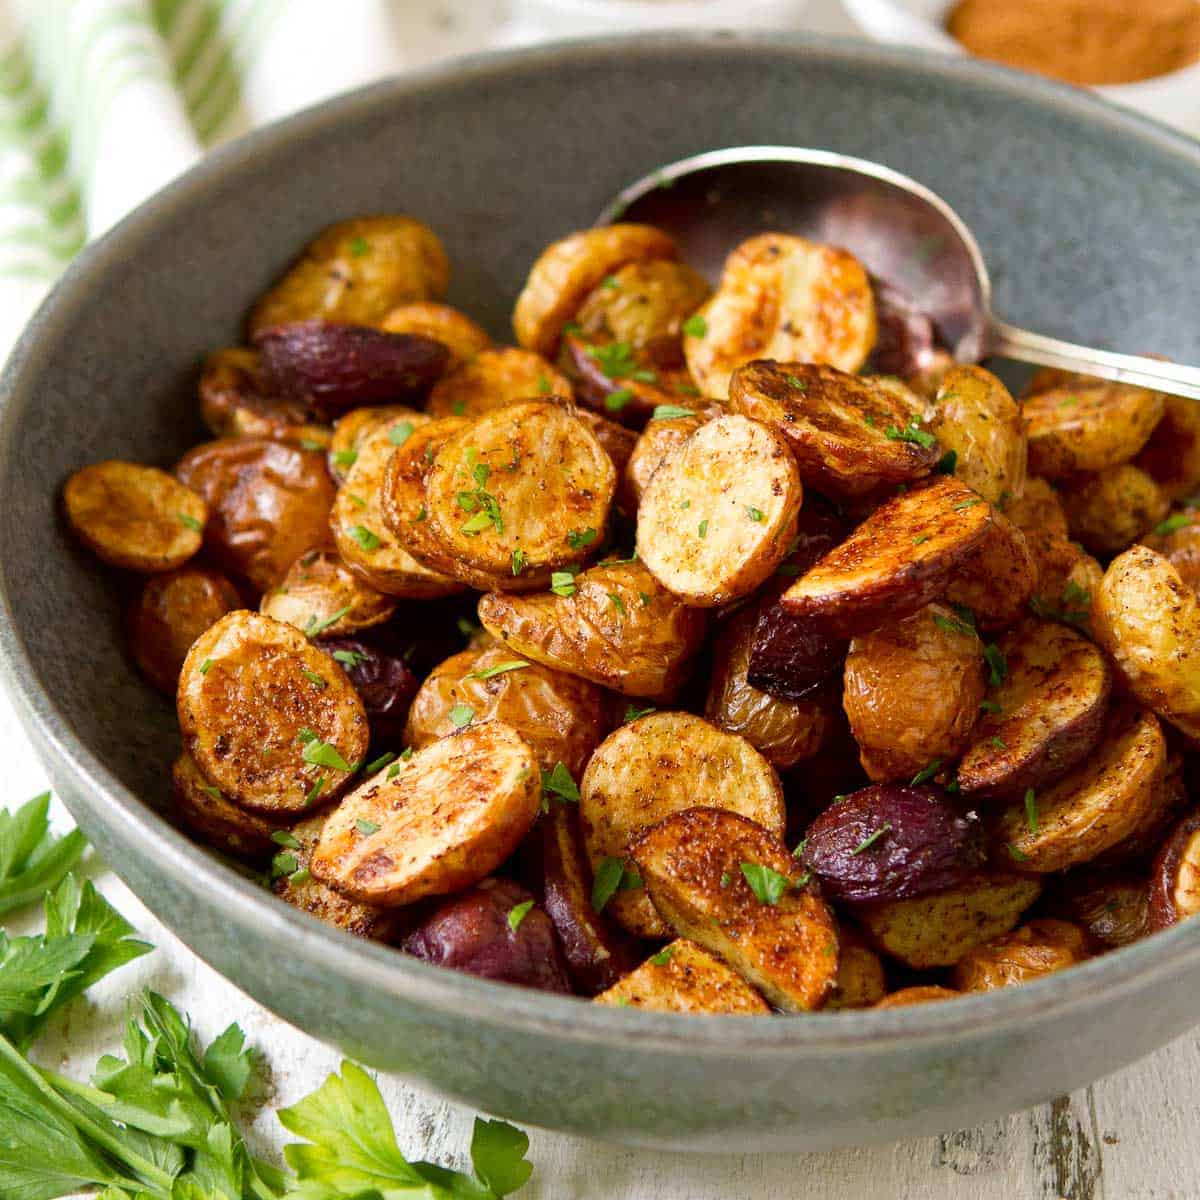 Roasted potatoes in a gray bowl, seasonings in small bowls.